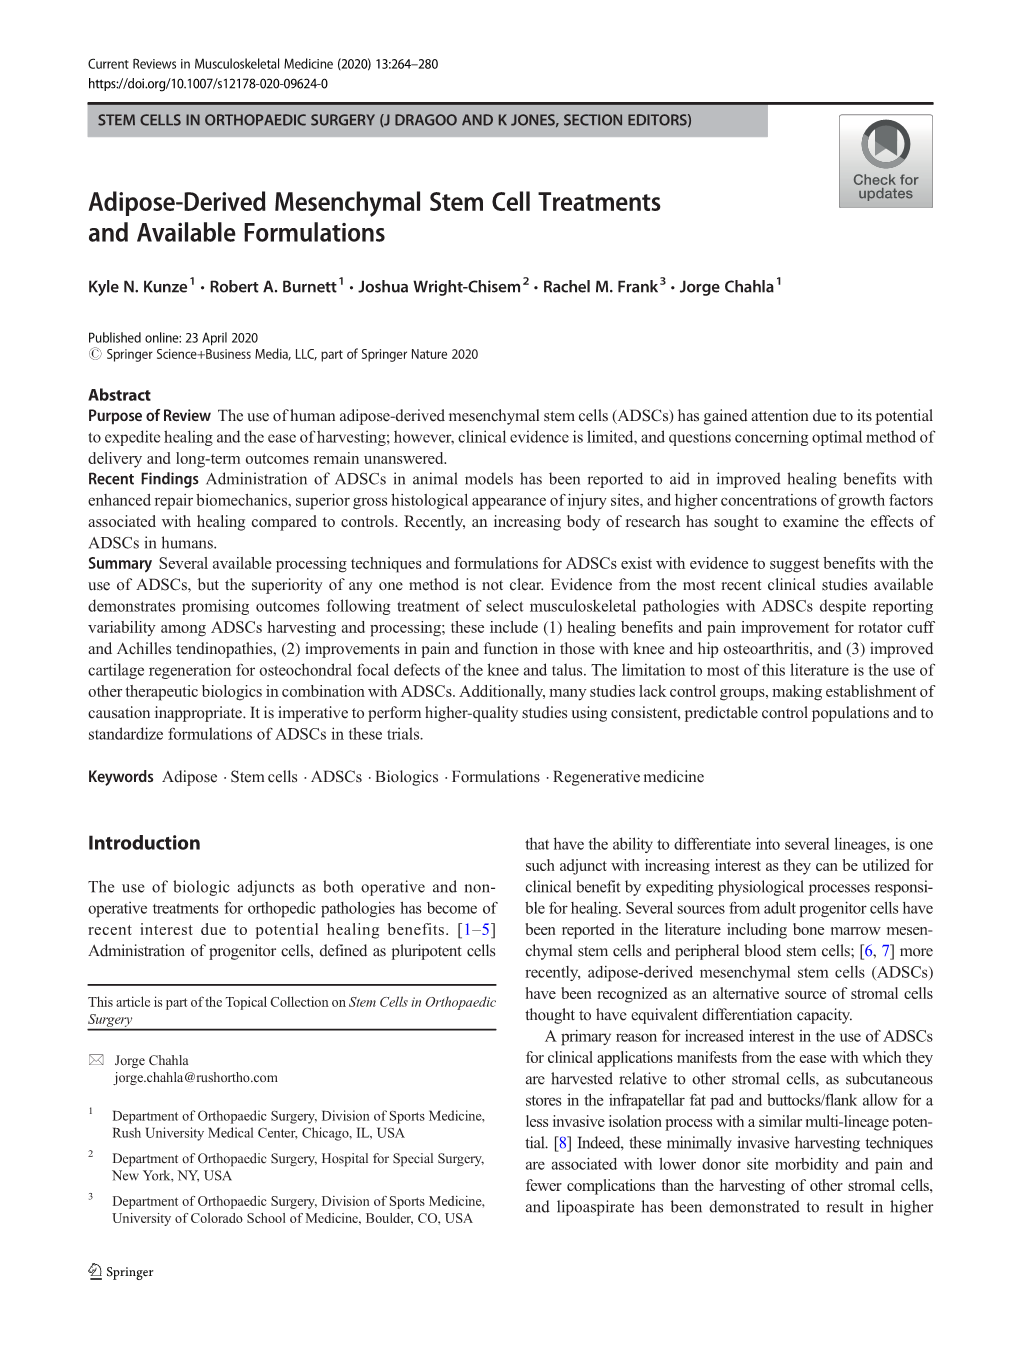 Adipose-Derived Mesenchymal Stem Cell Treatments and Available Formulations